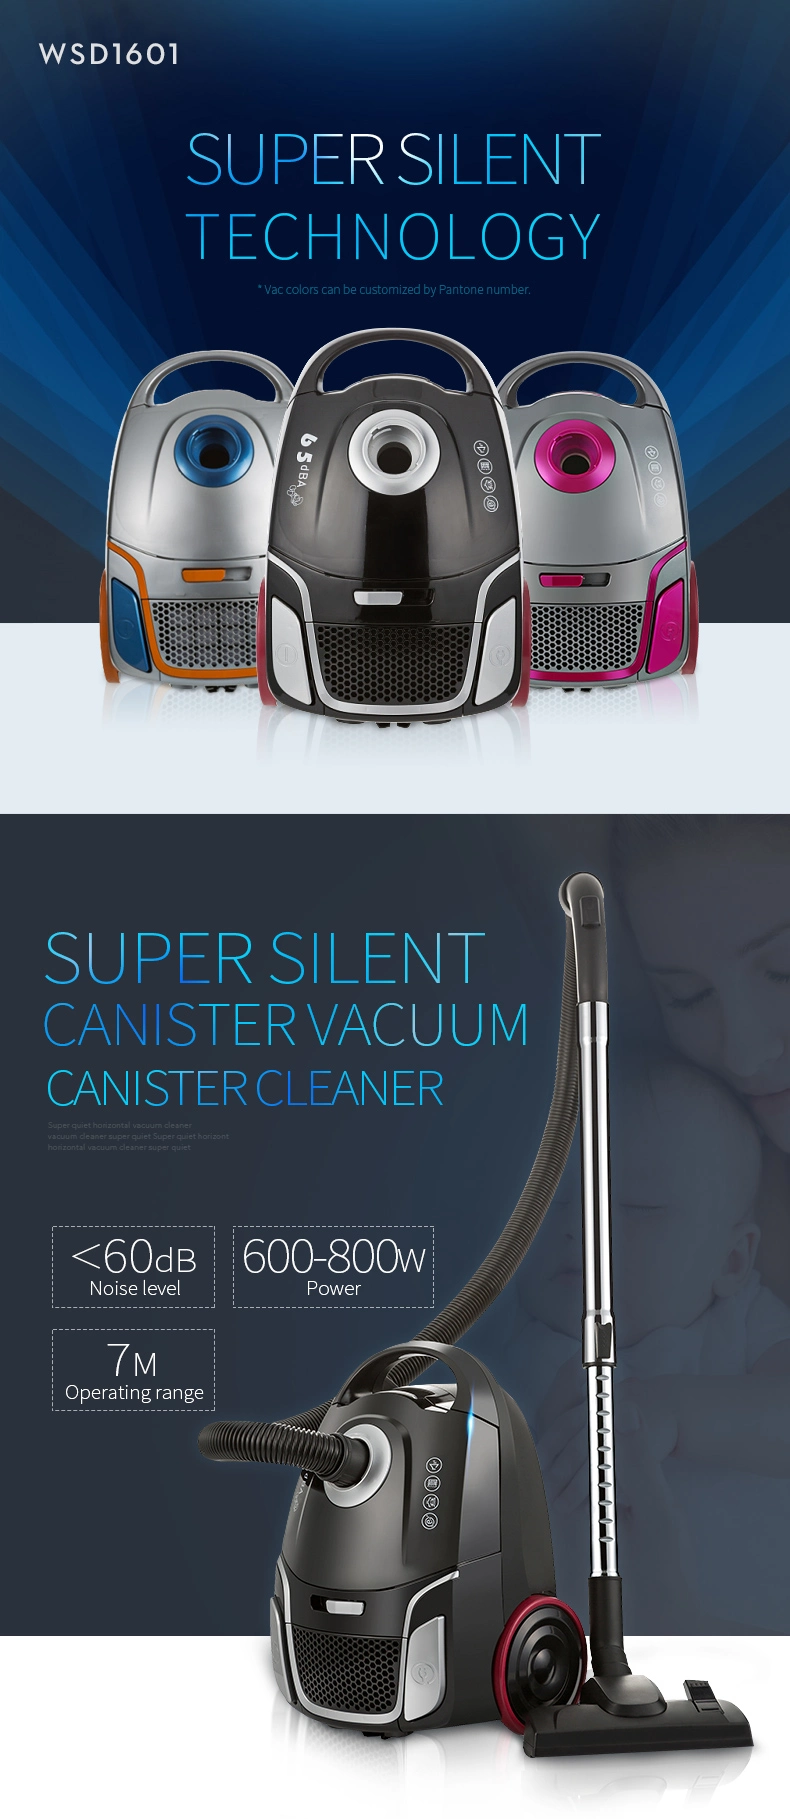 100-240V High Efficiency Bagged Electric Super Silent Vacuum Cleaner